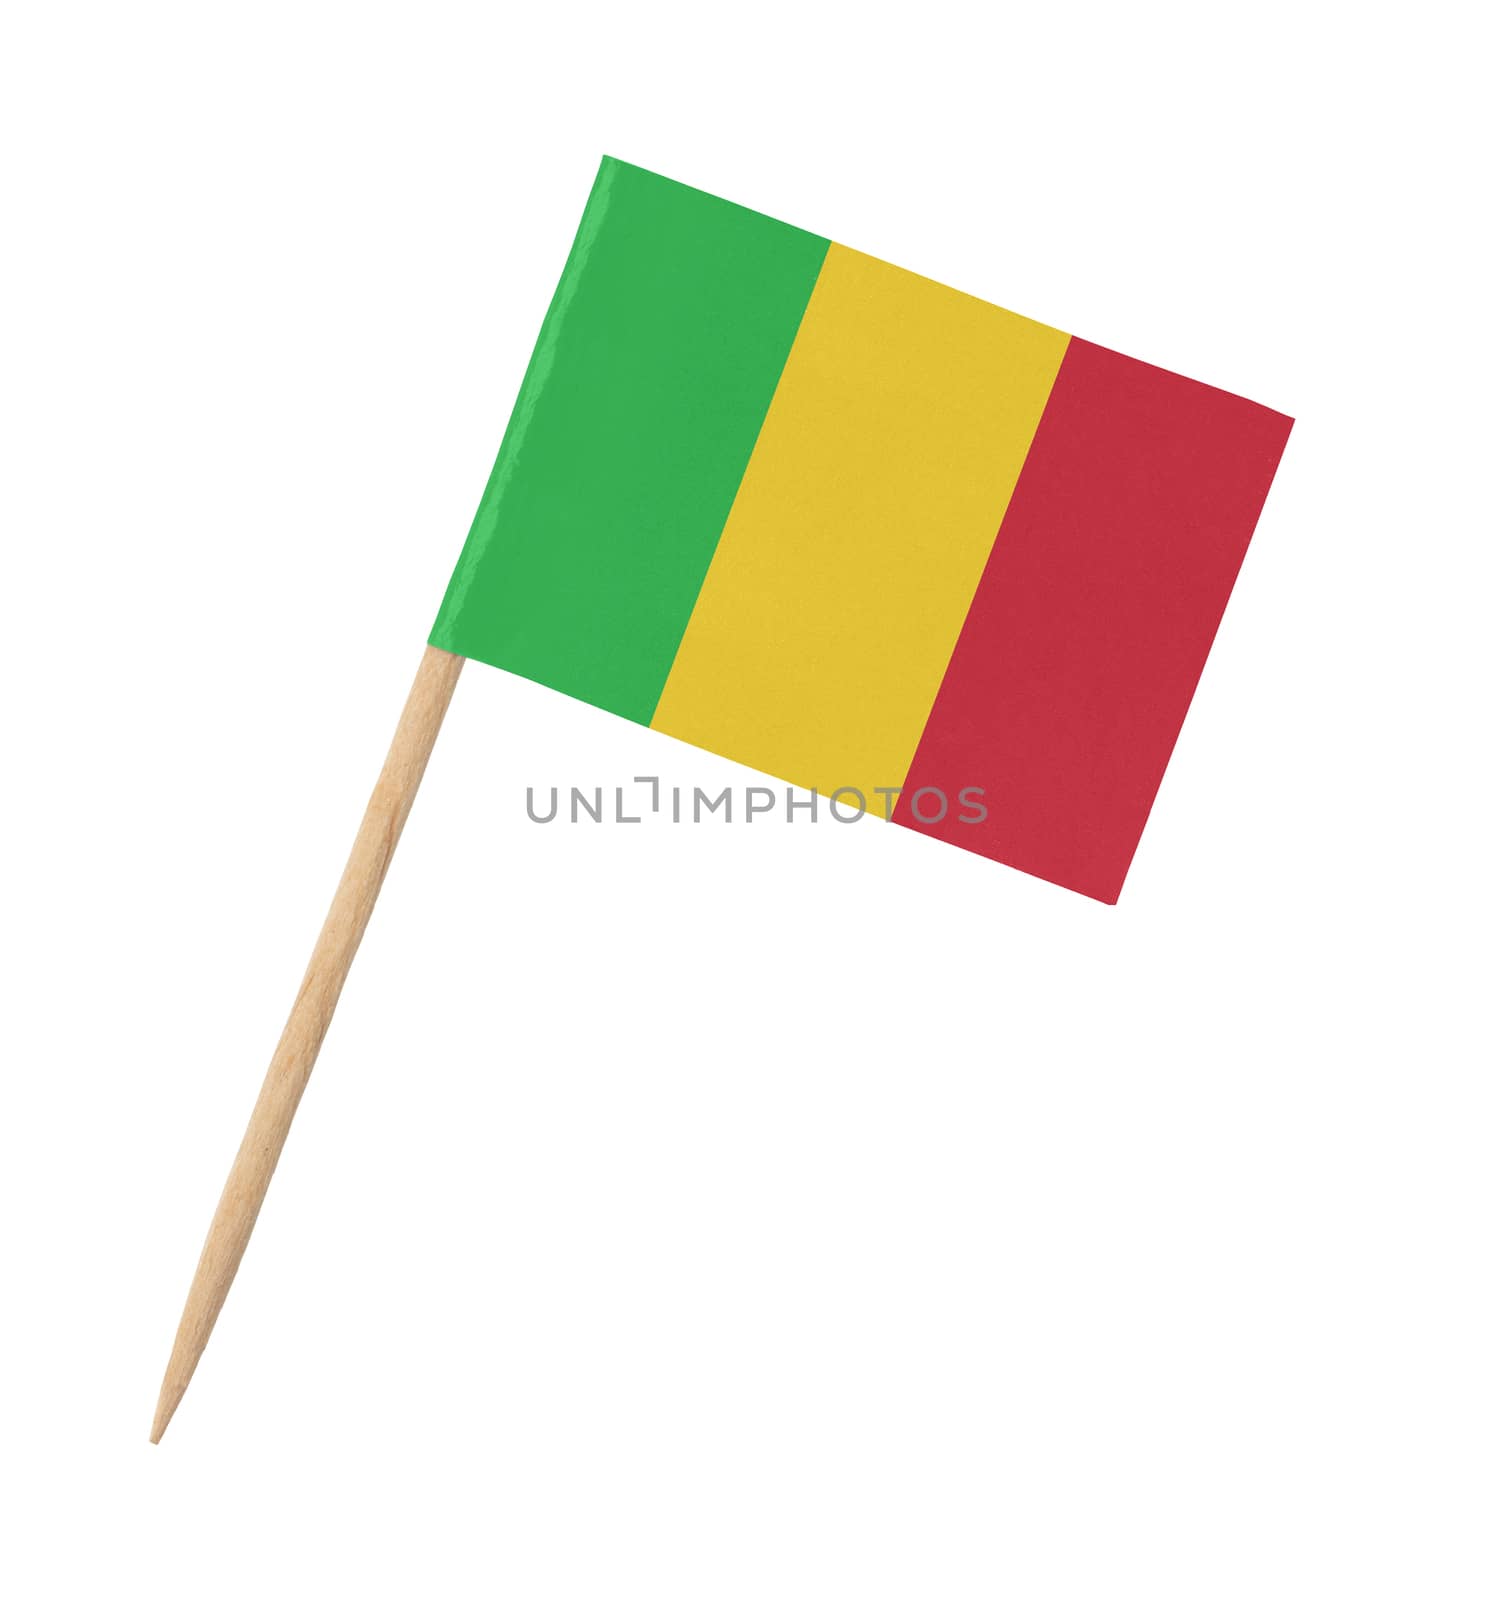 Small paper flag of Mali on wooden stick by michaklootwijk